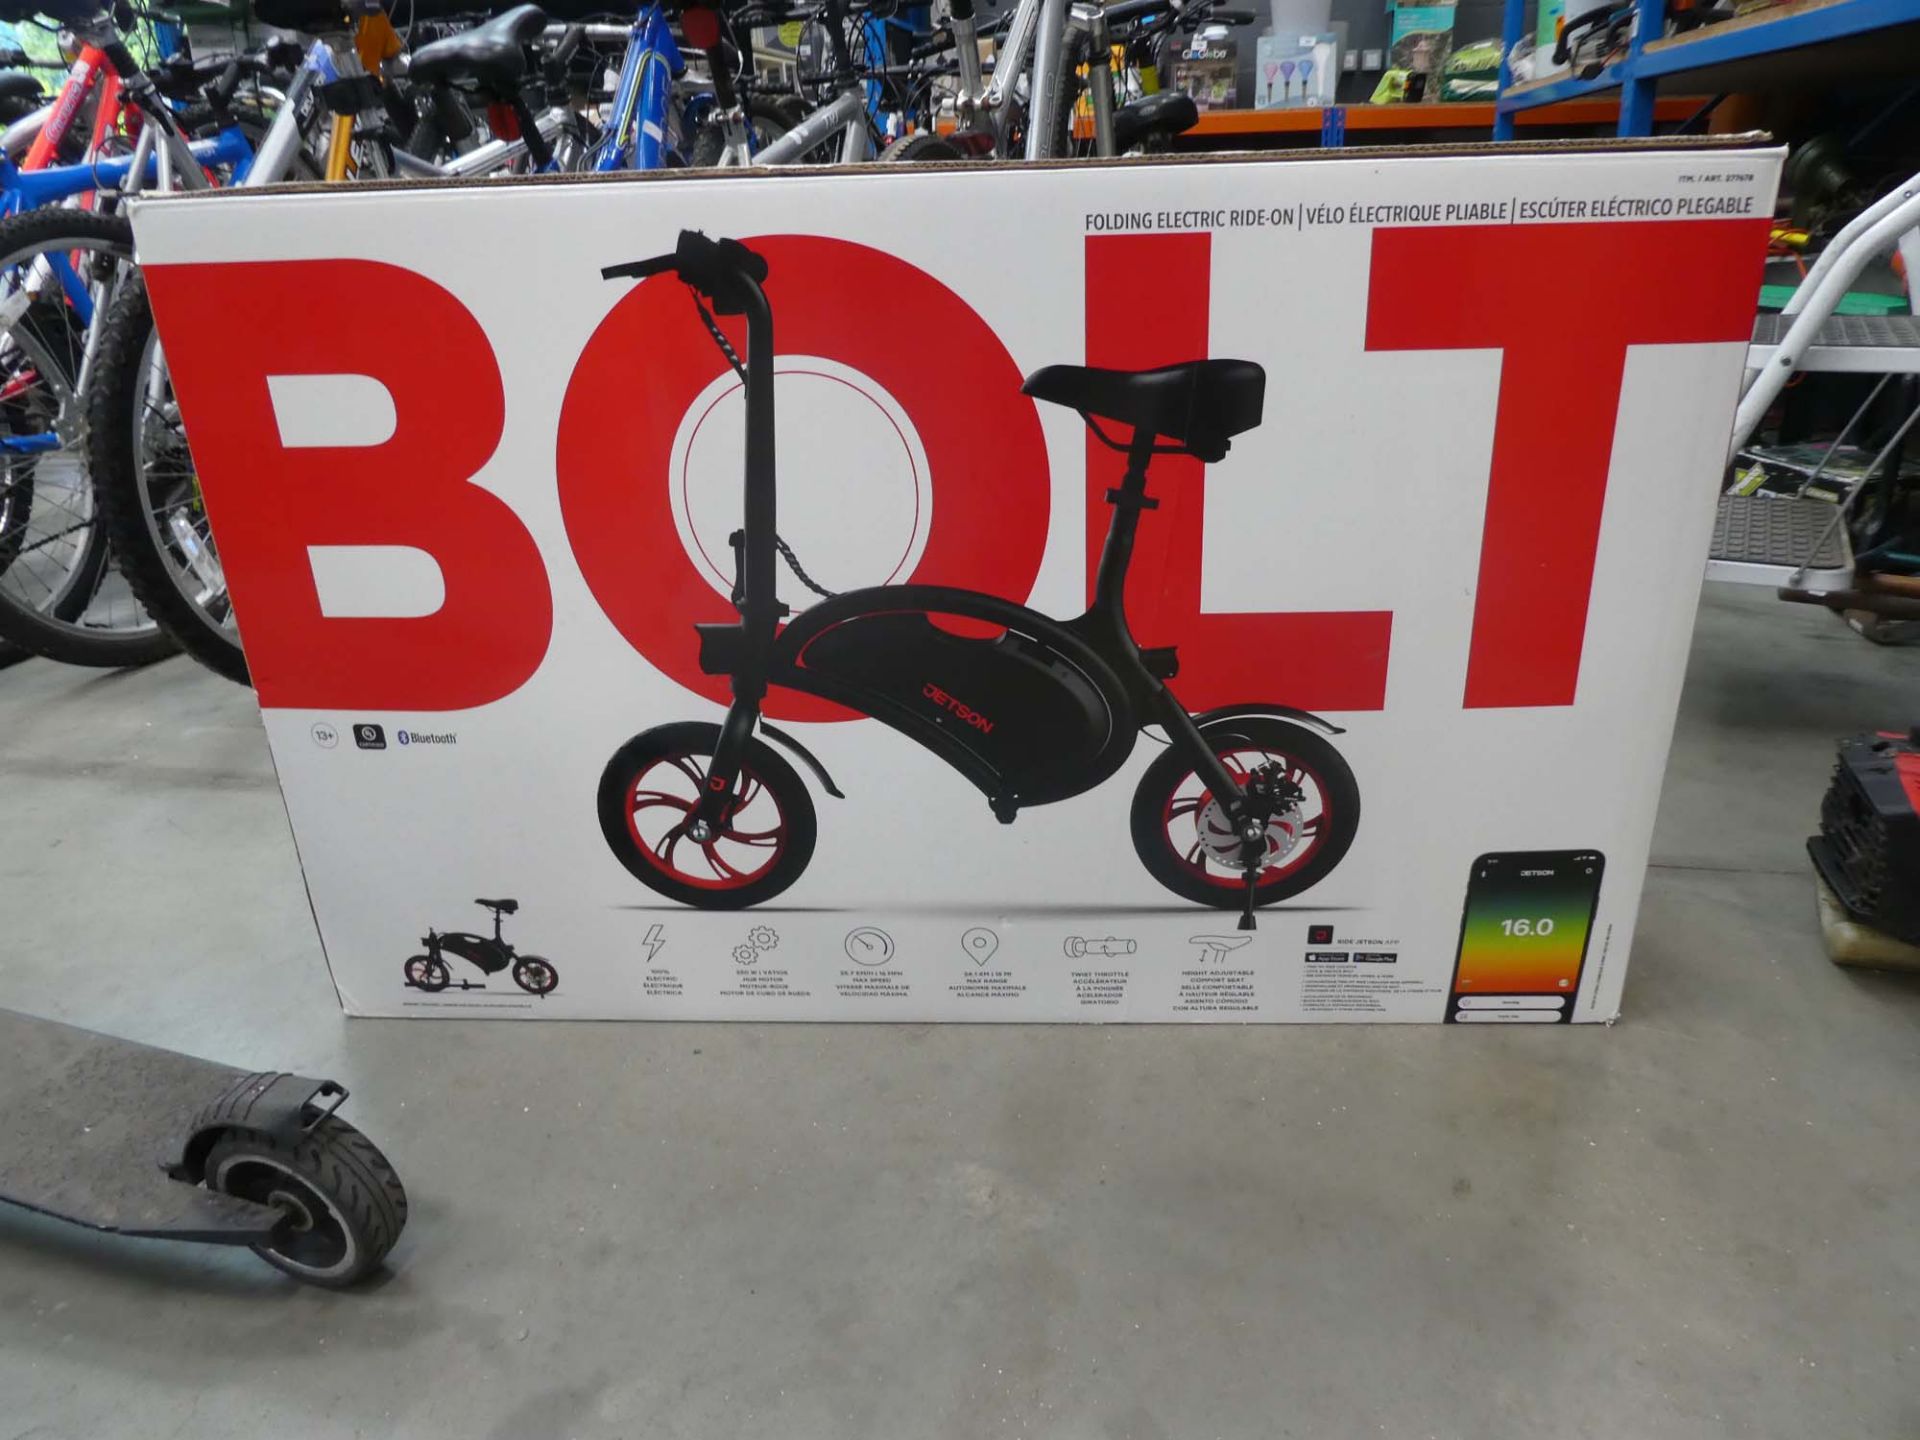 Bolt boxed electric bike with charger